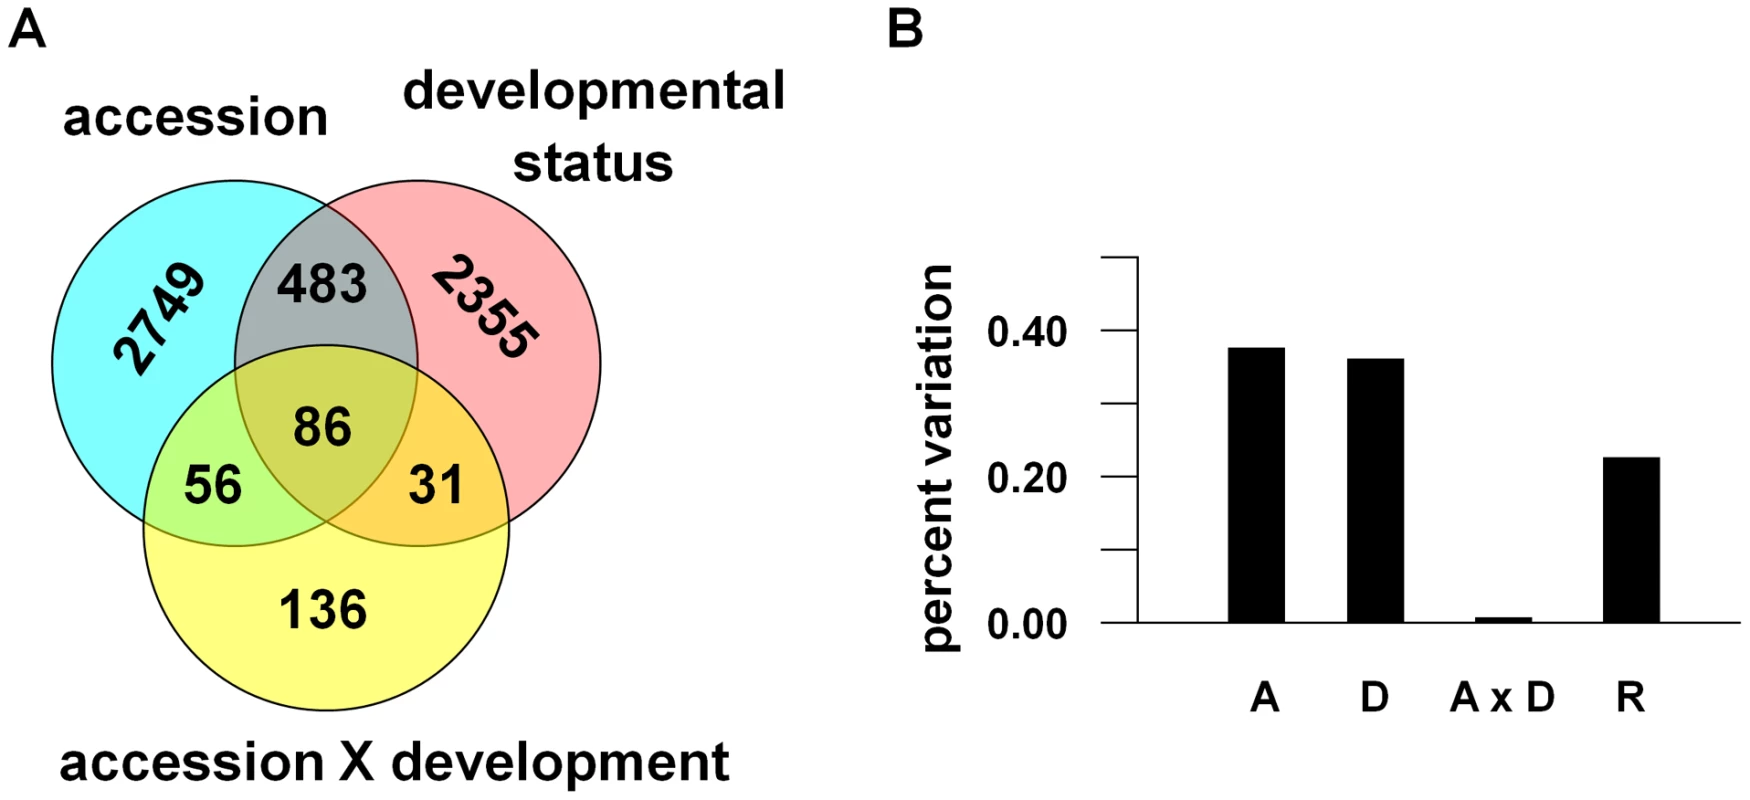 Components of transcriptional variance in <i>A. thaliana</i> in the field.